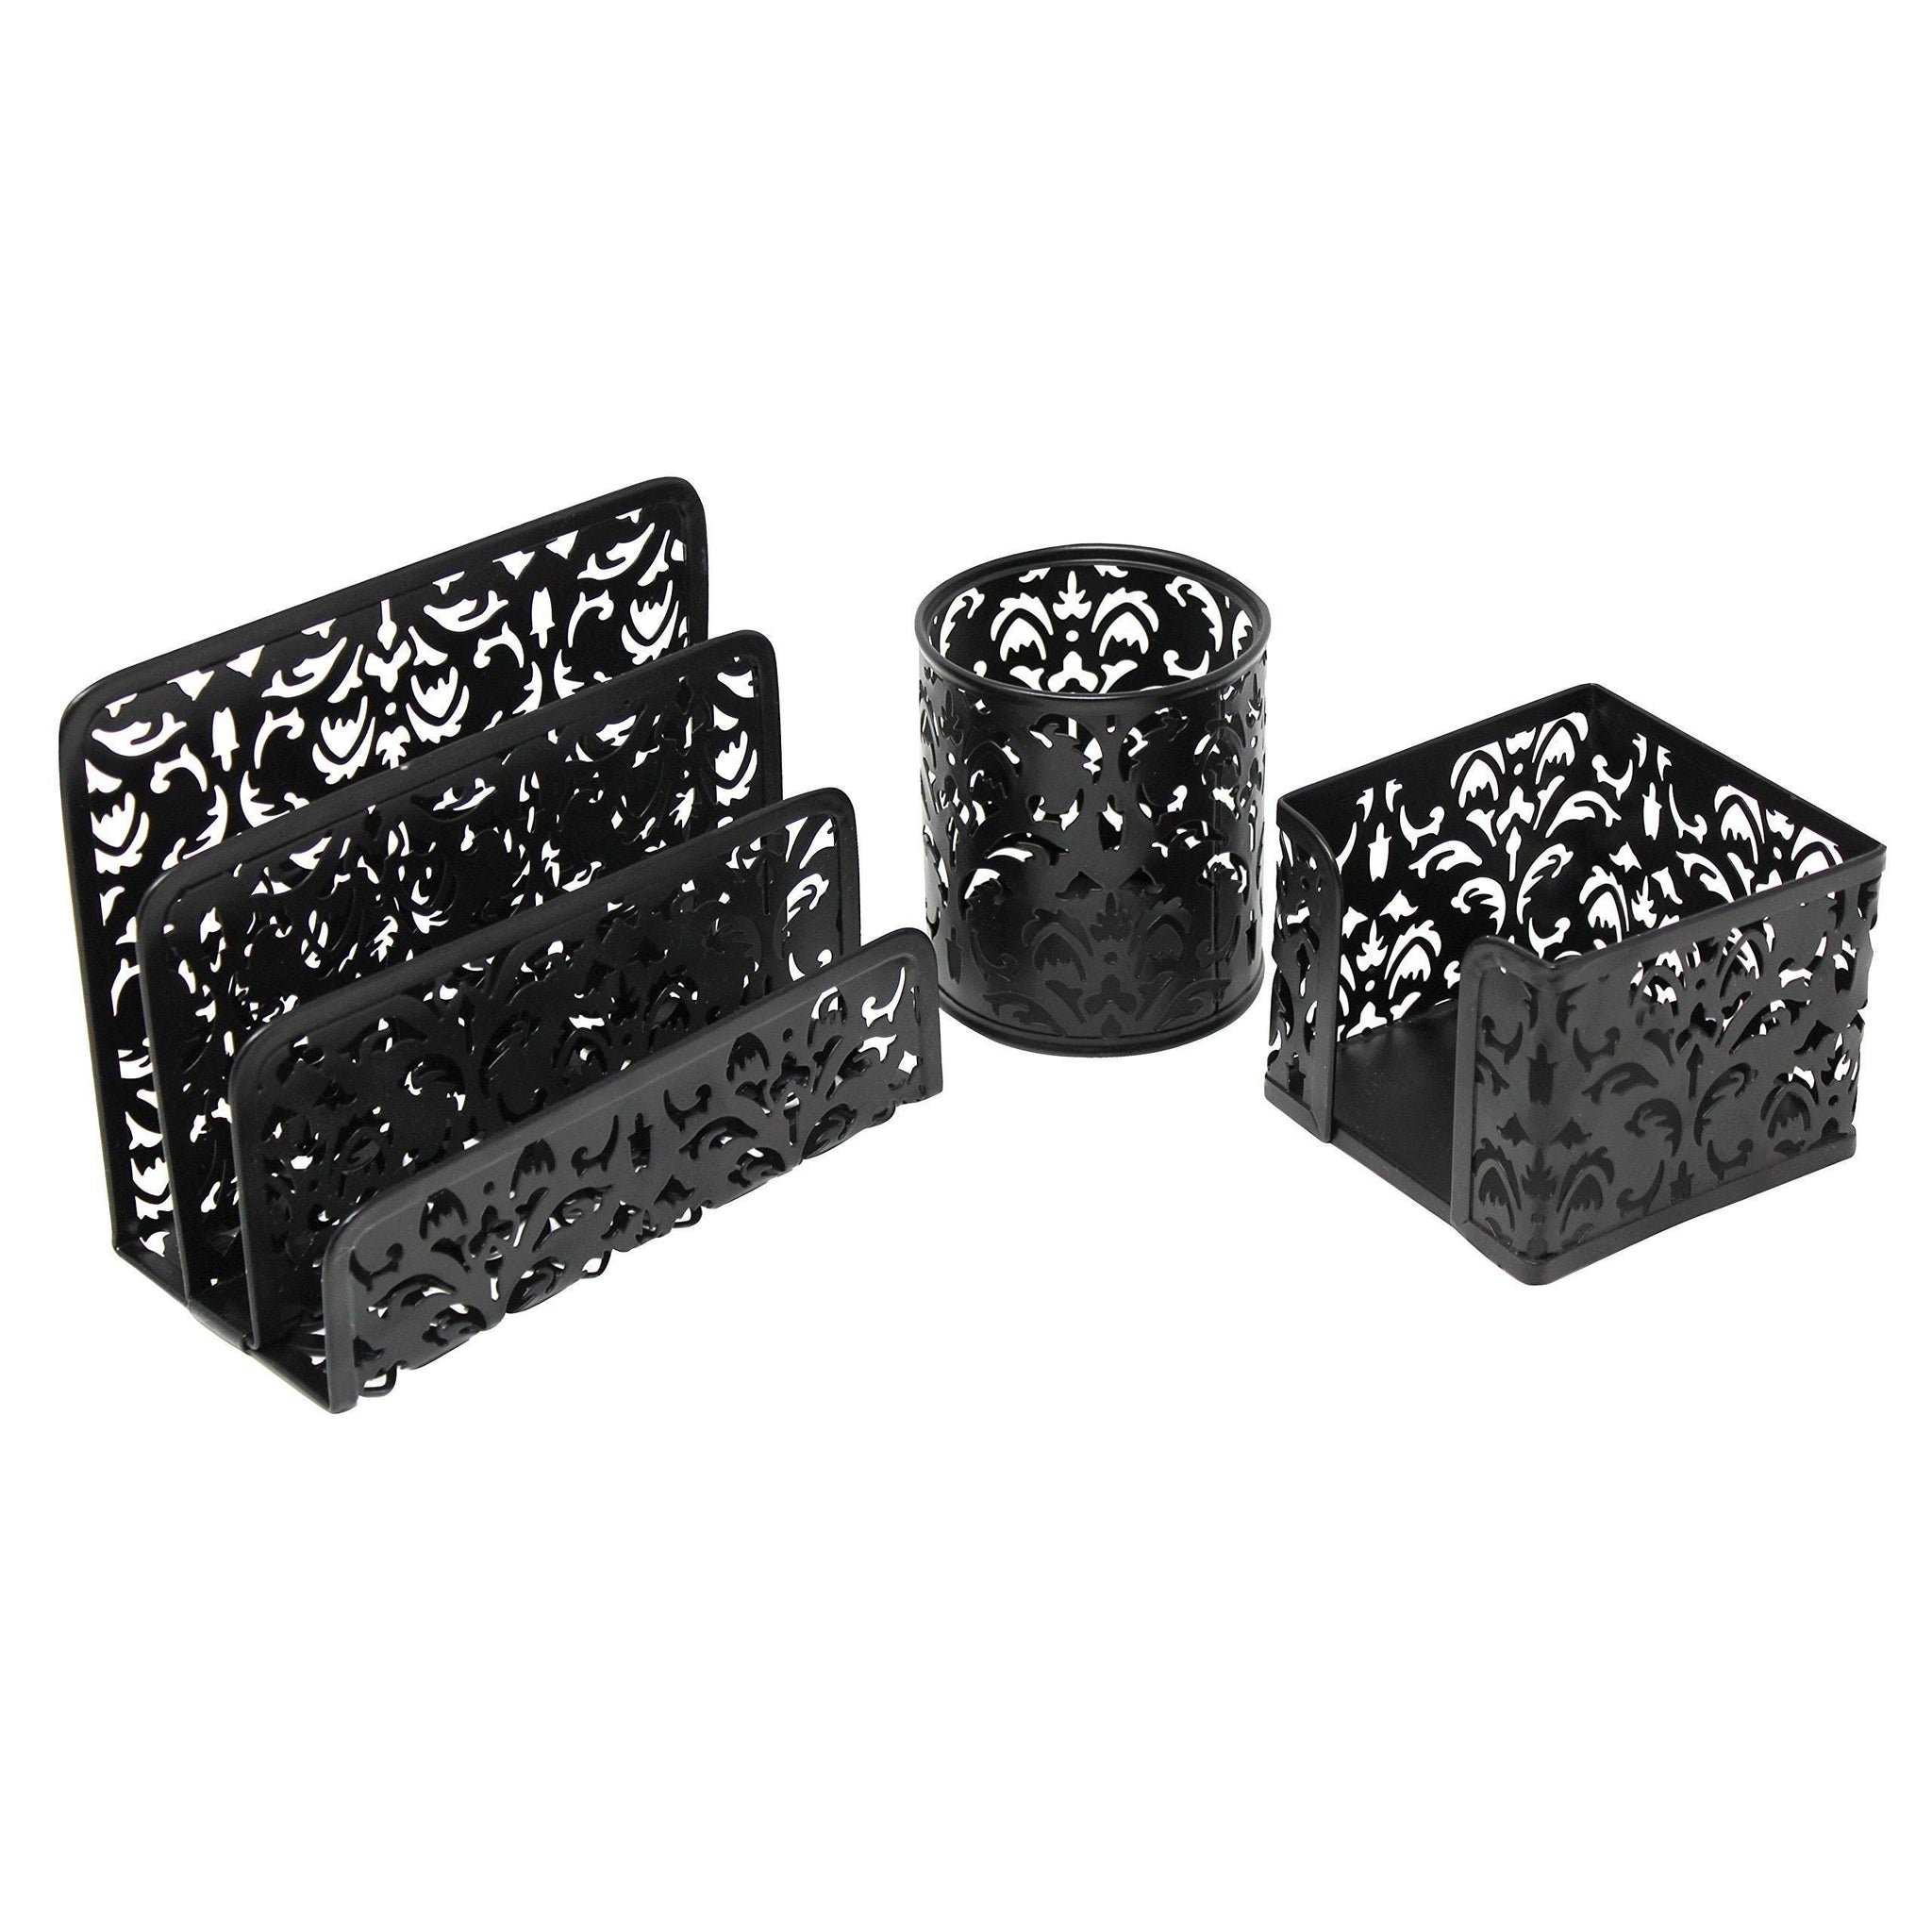 3 Piece Mesh Office Organizer & Desk Accessories Set - Can Be Used On Desktop | Table | Counter in Kitchen at Work - Black